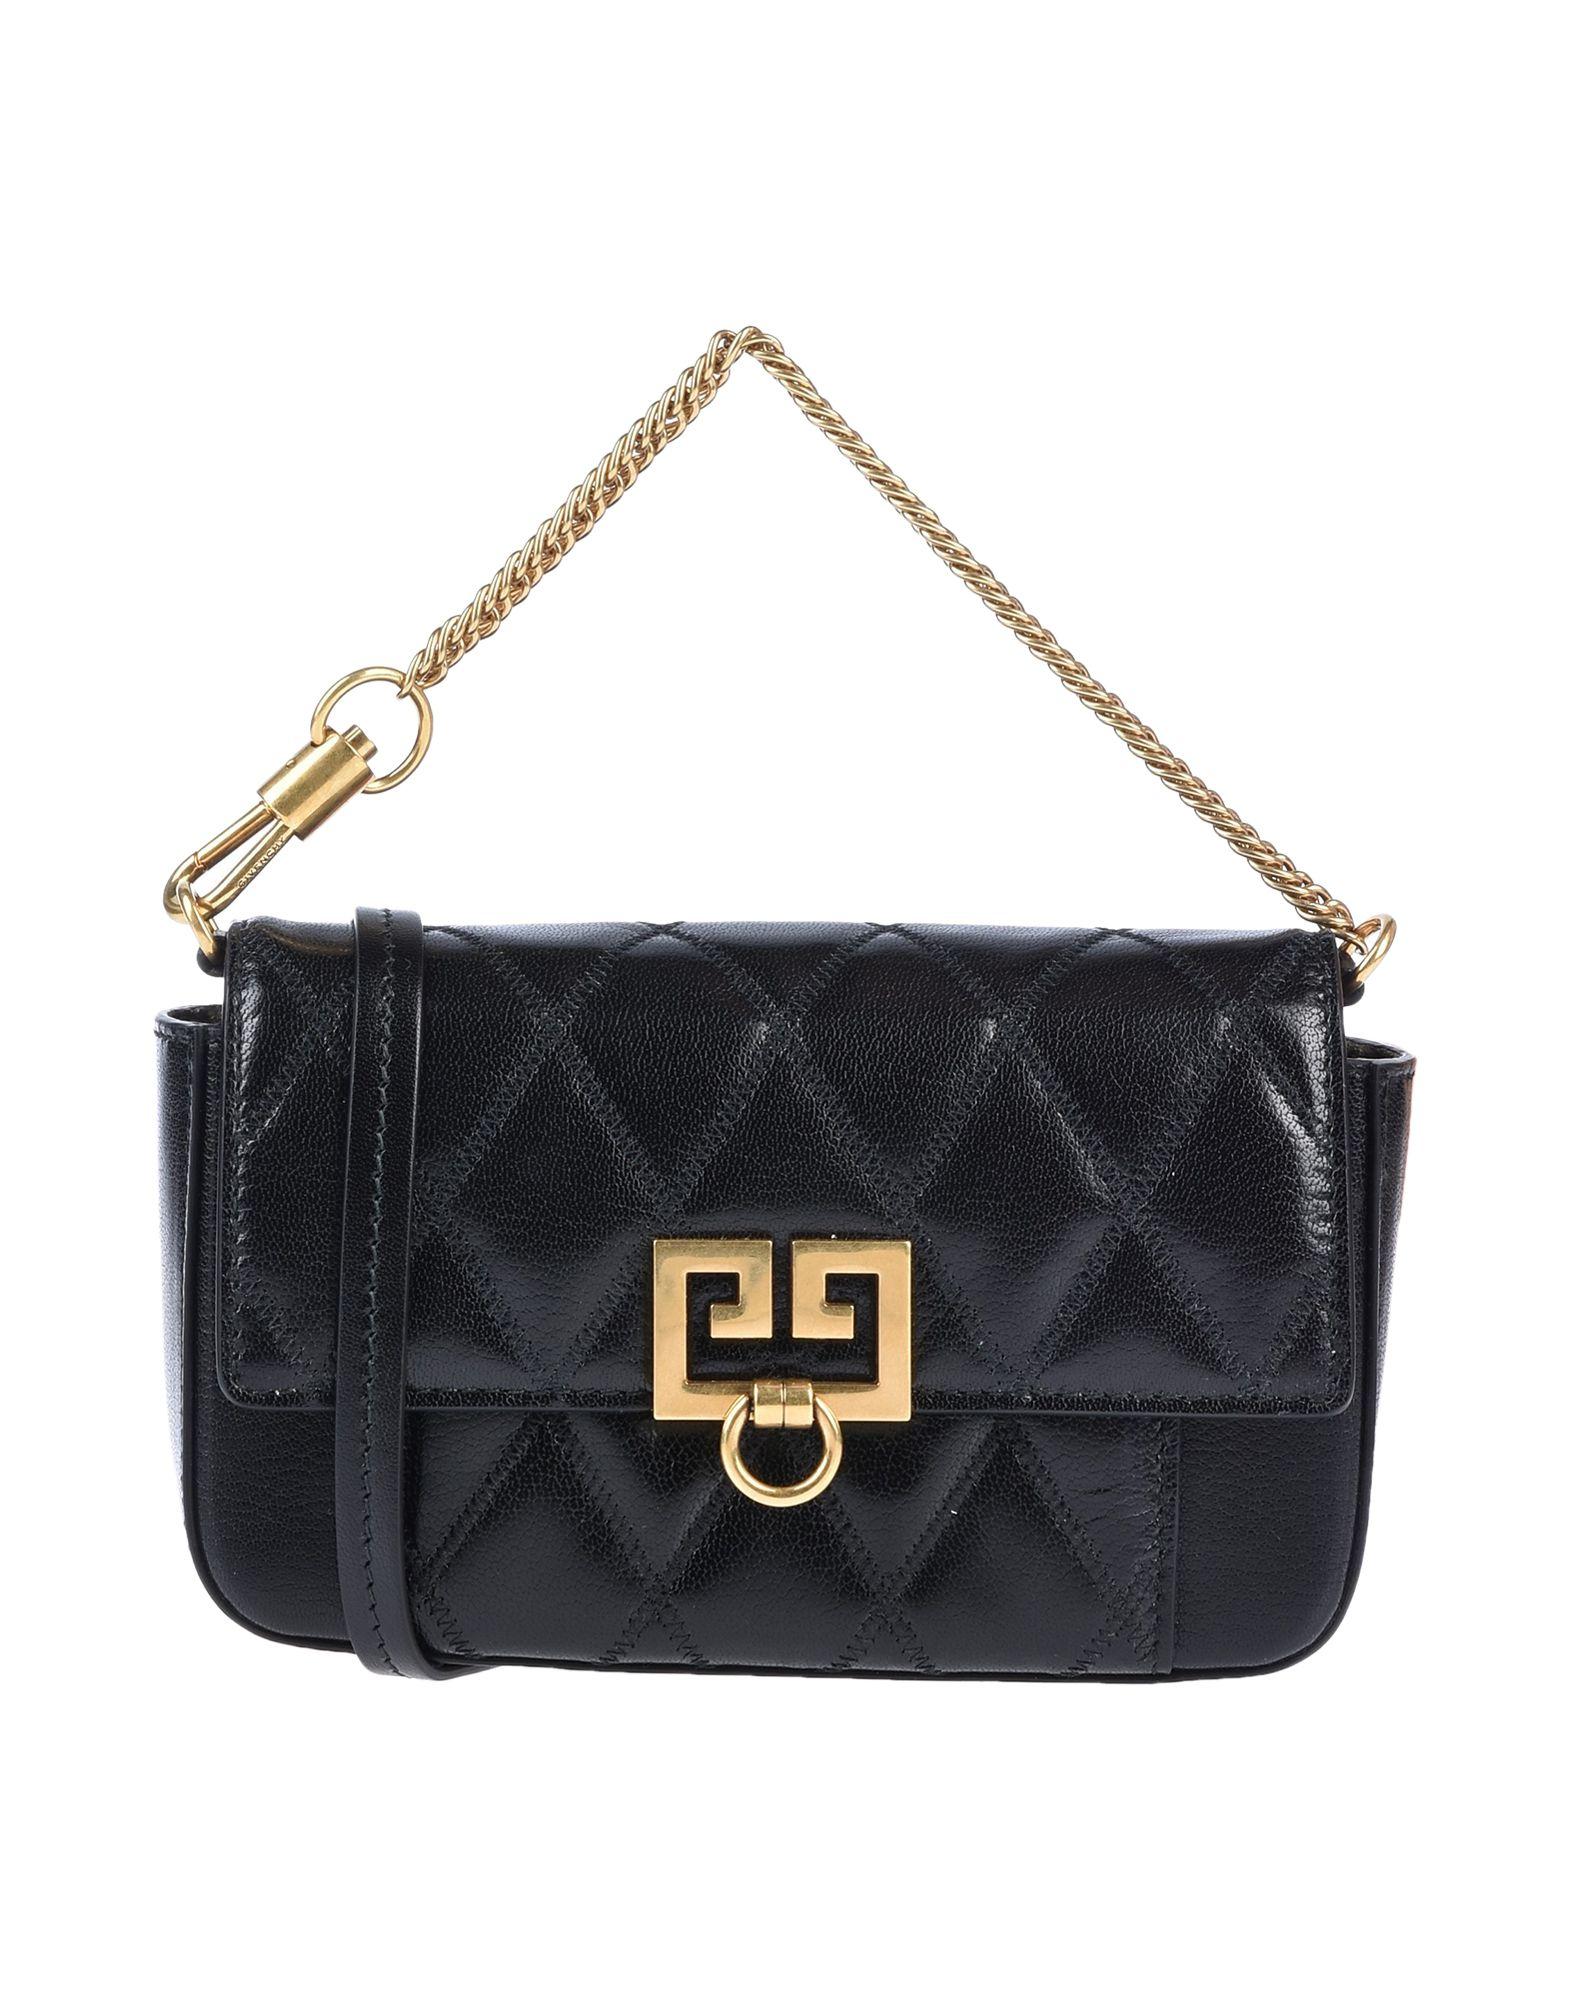 Givenchy Cross-body Bag in Black - Lyst